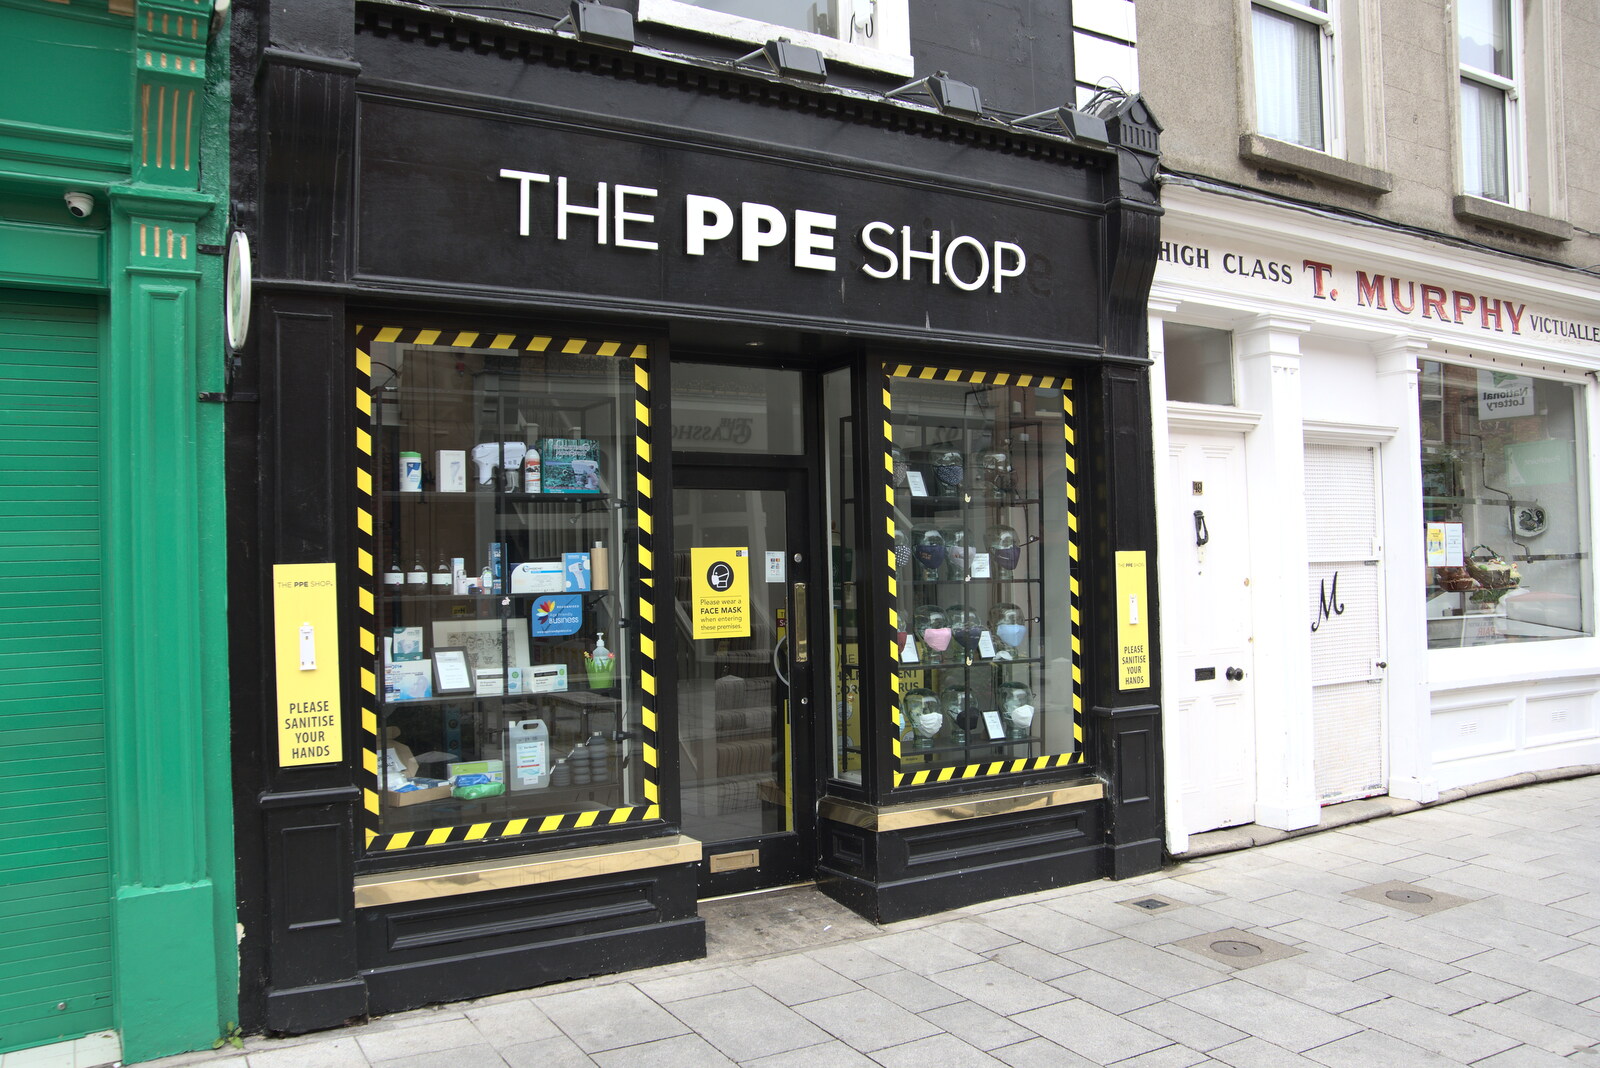 Shop of the moment: The PPE Shop from Manorhamilton and the Street Art of Dún Laoghaire, Ireland - 15th August 2021